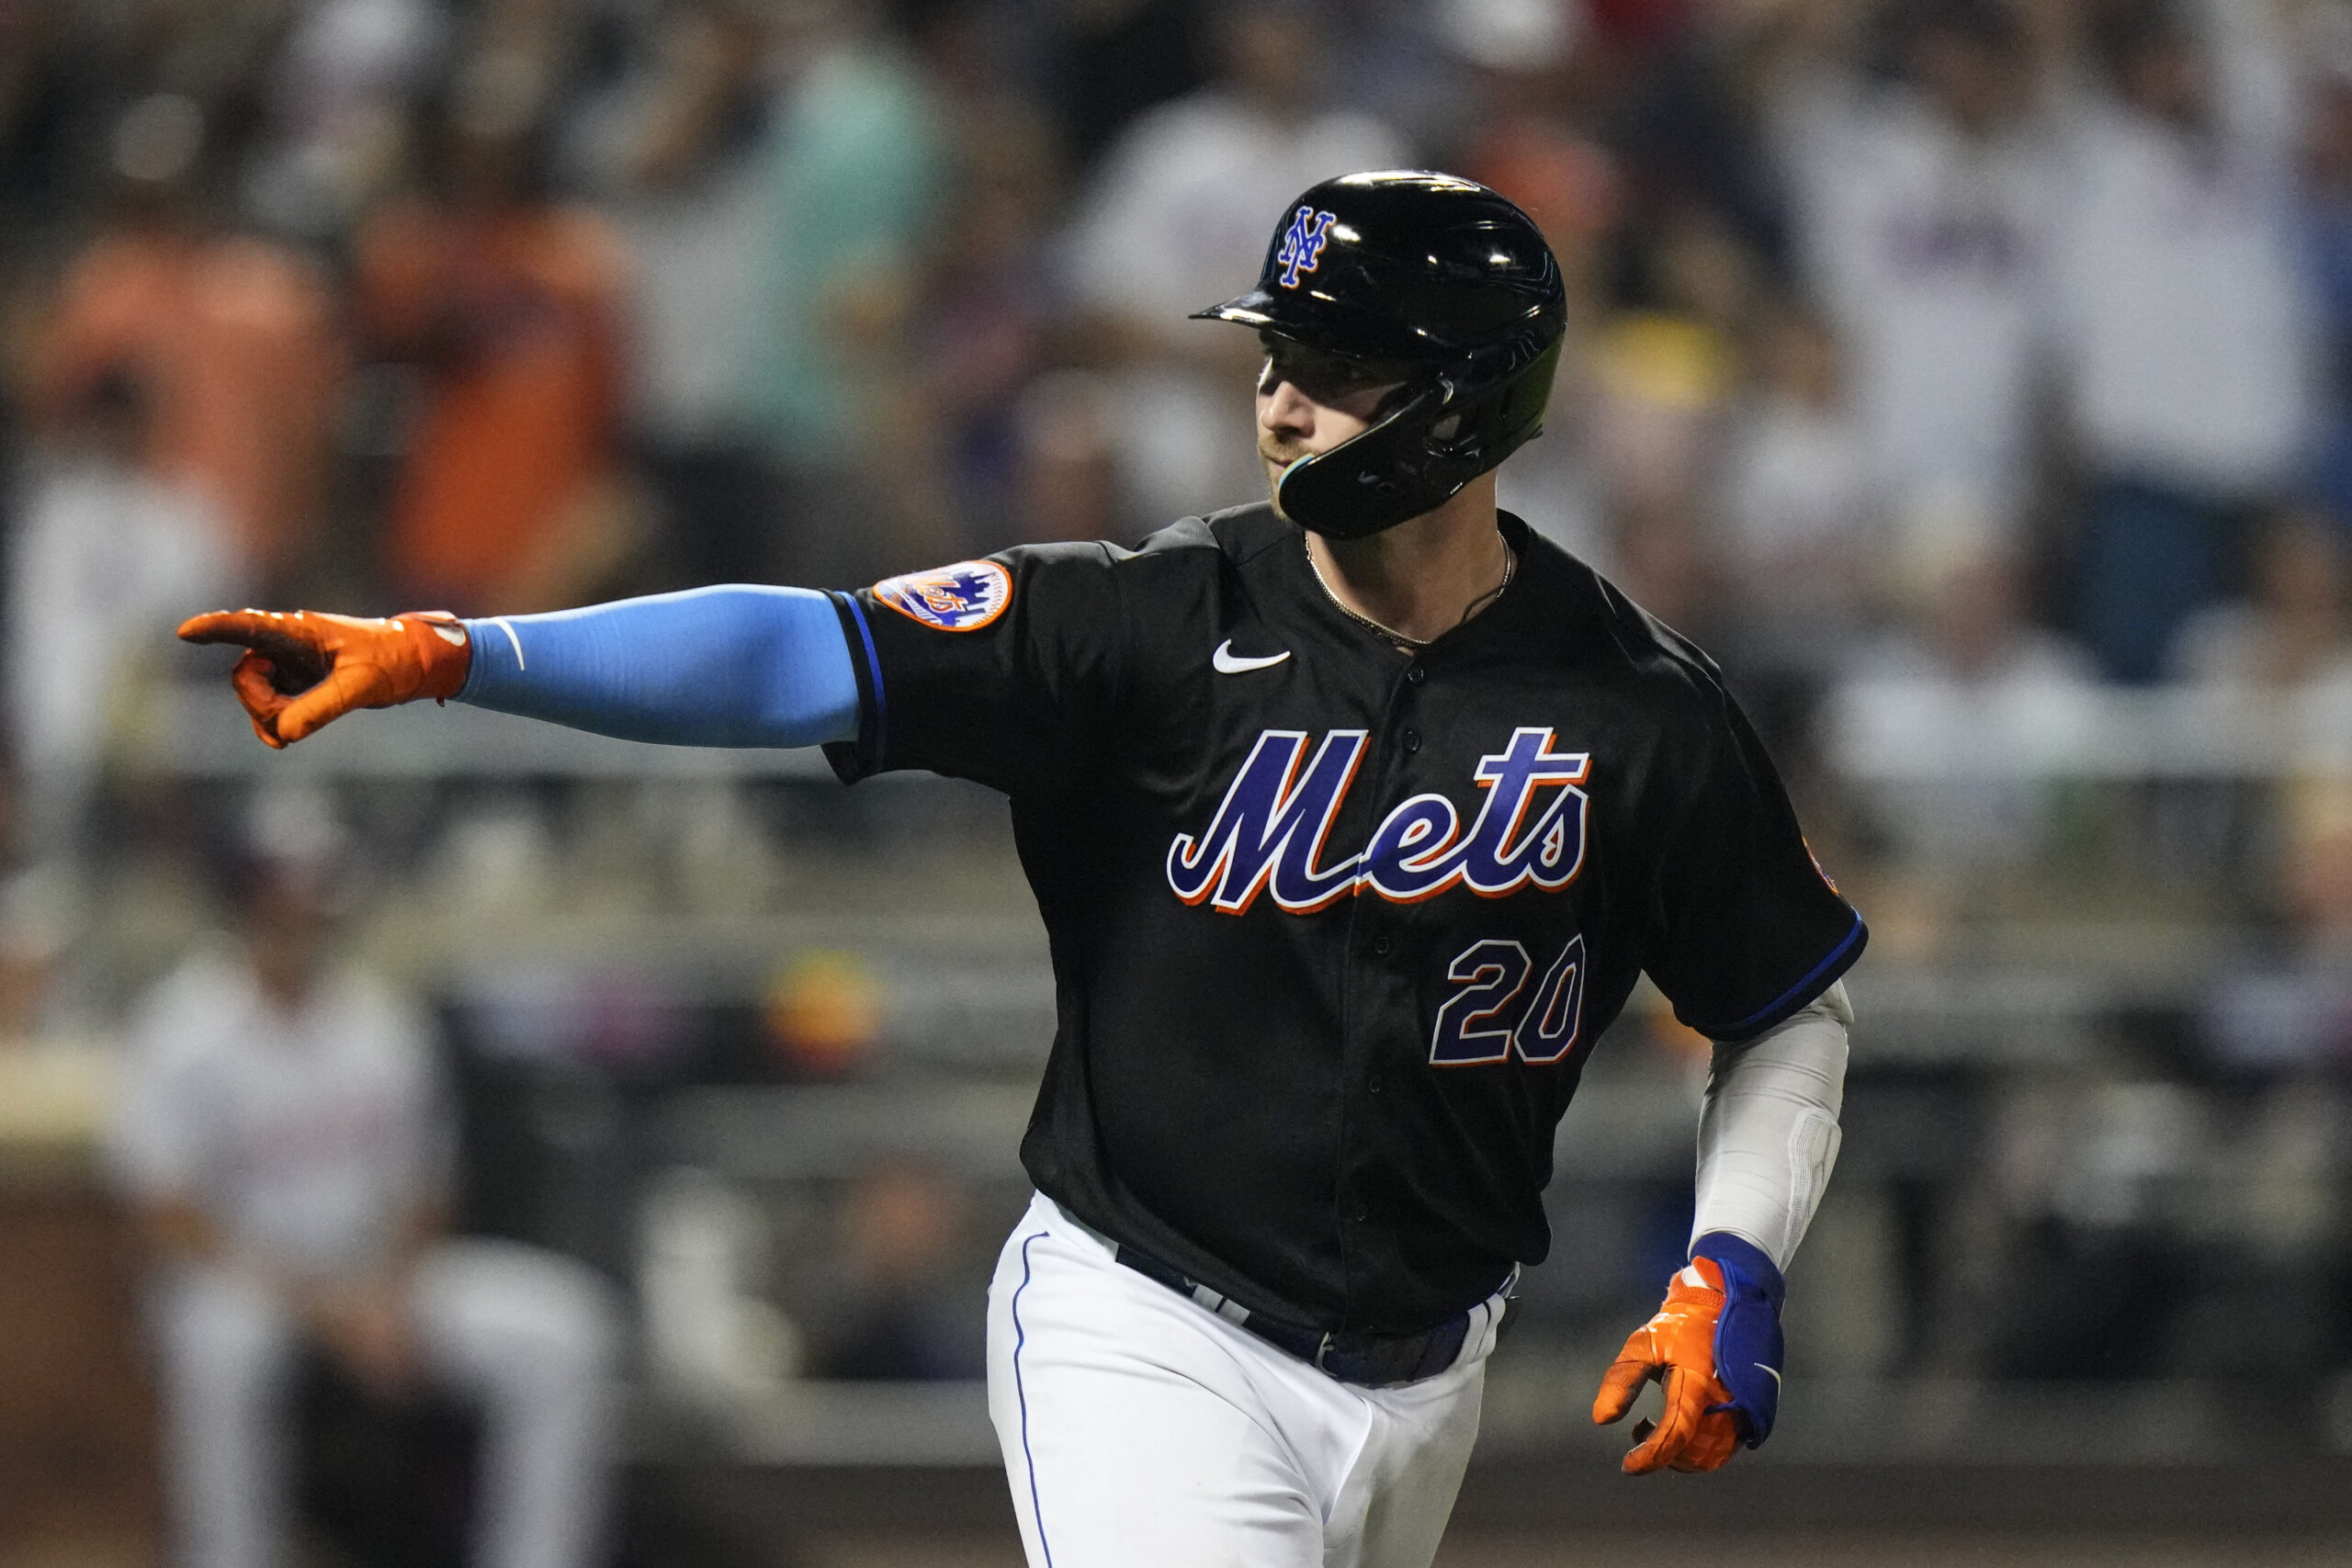 Pete Alonso homers twice to help the Mets beat the Nationals 5-1 - WTOP News